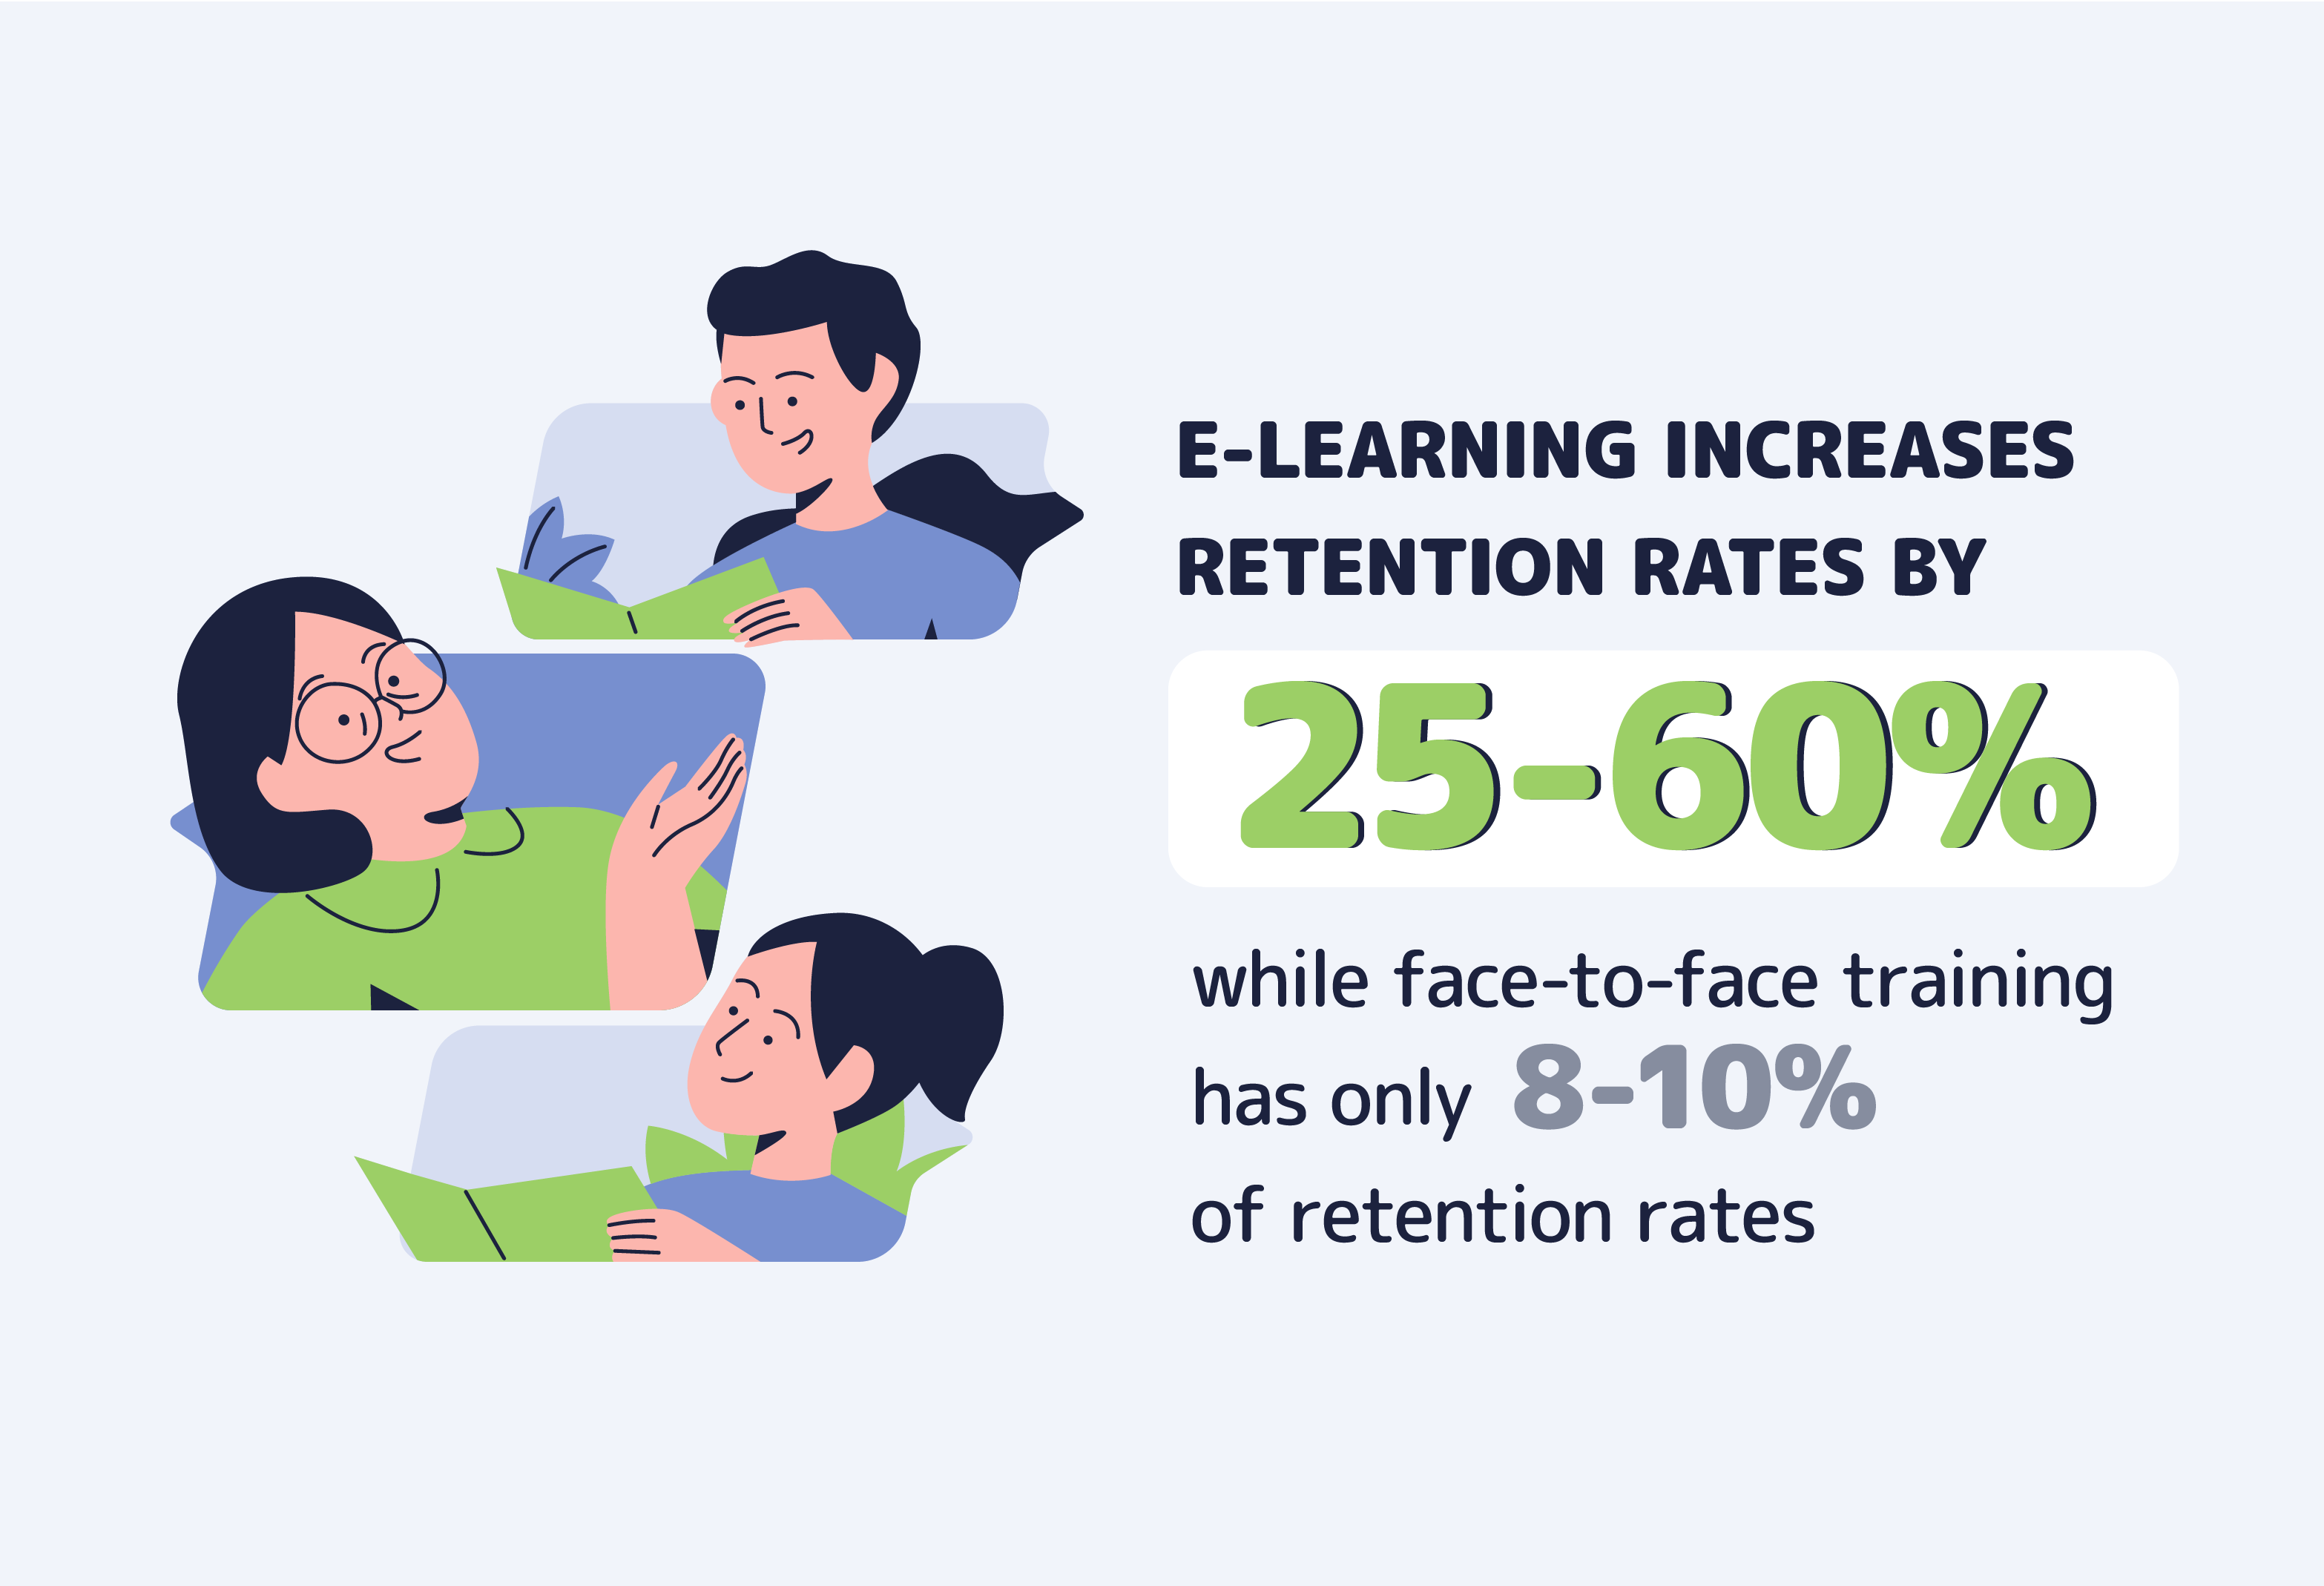 eLearning has higher retention rates